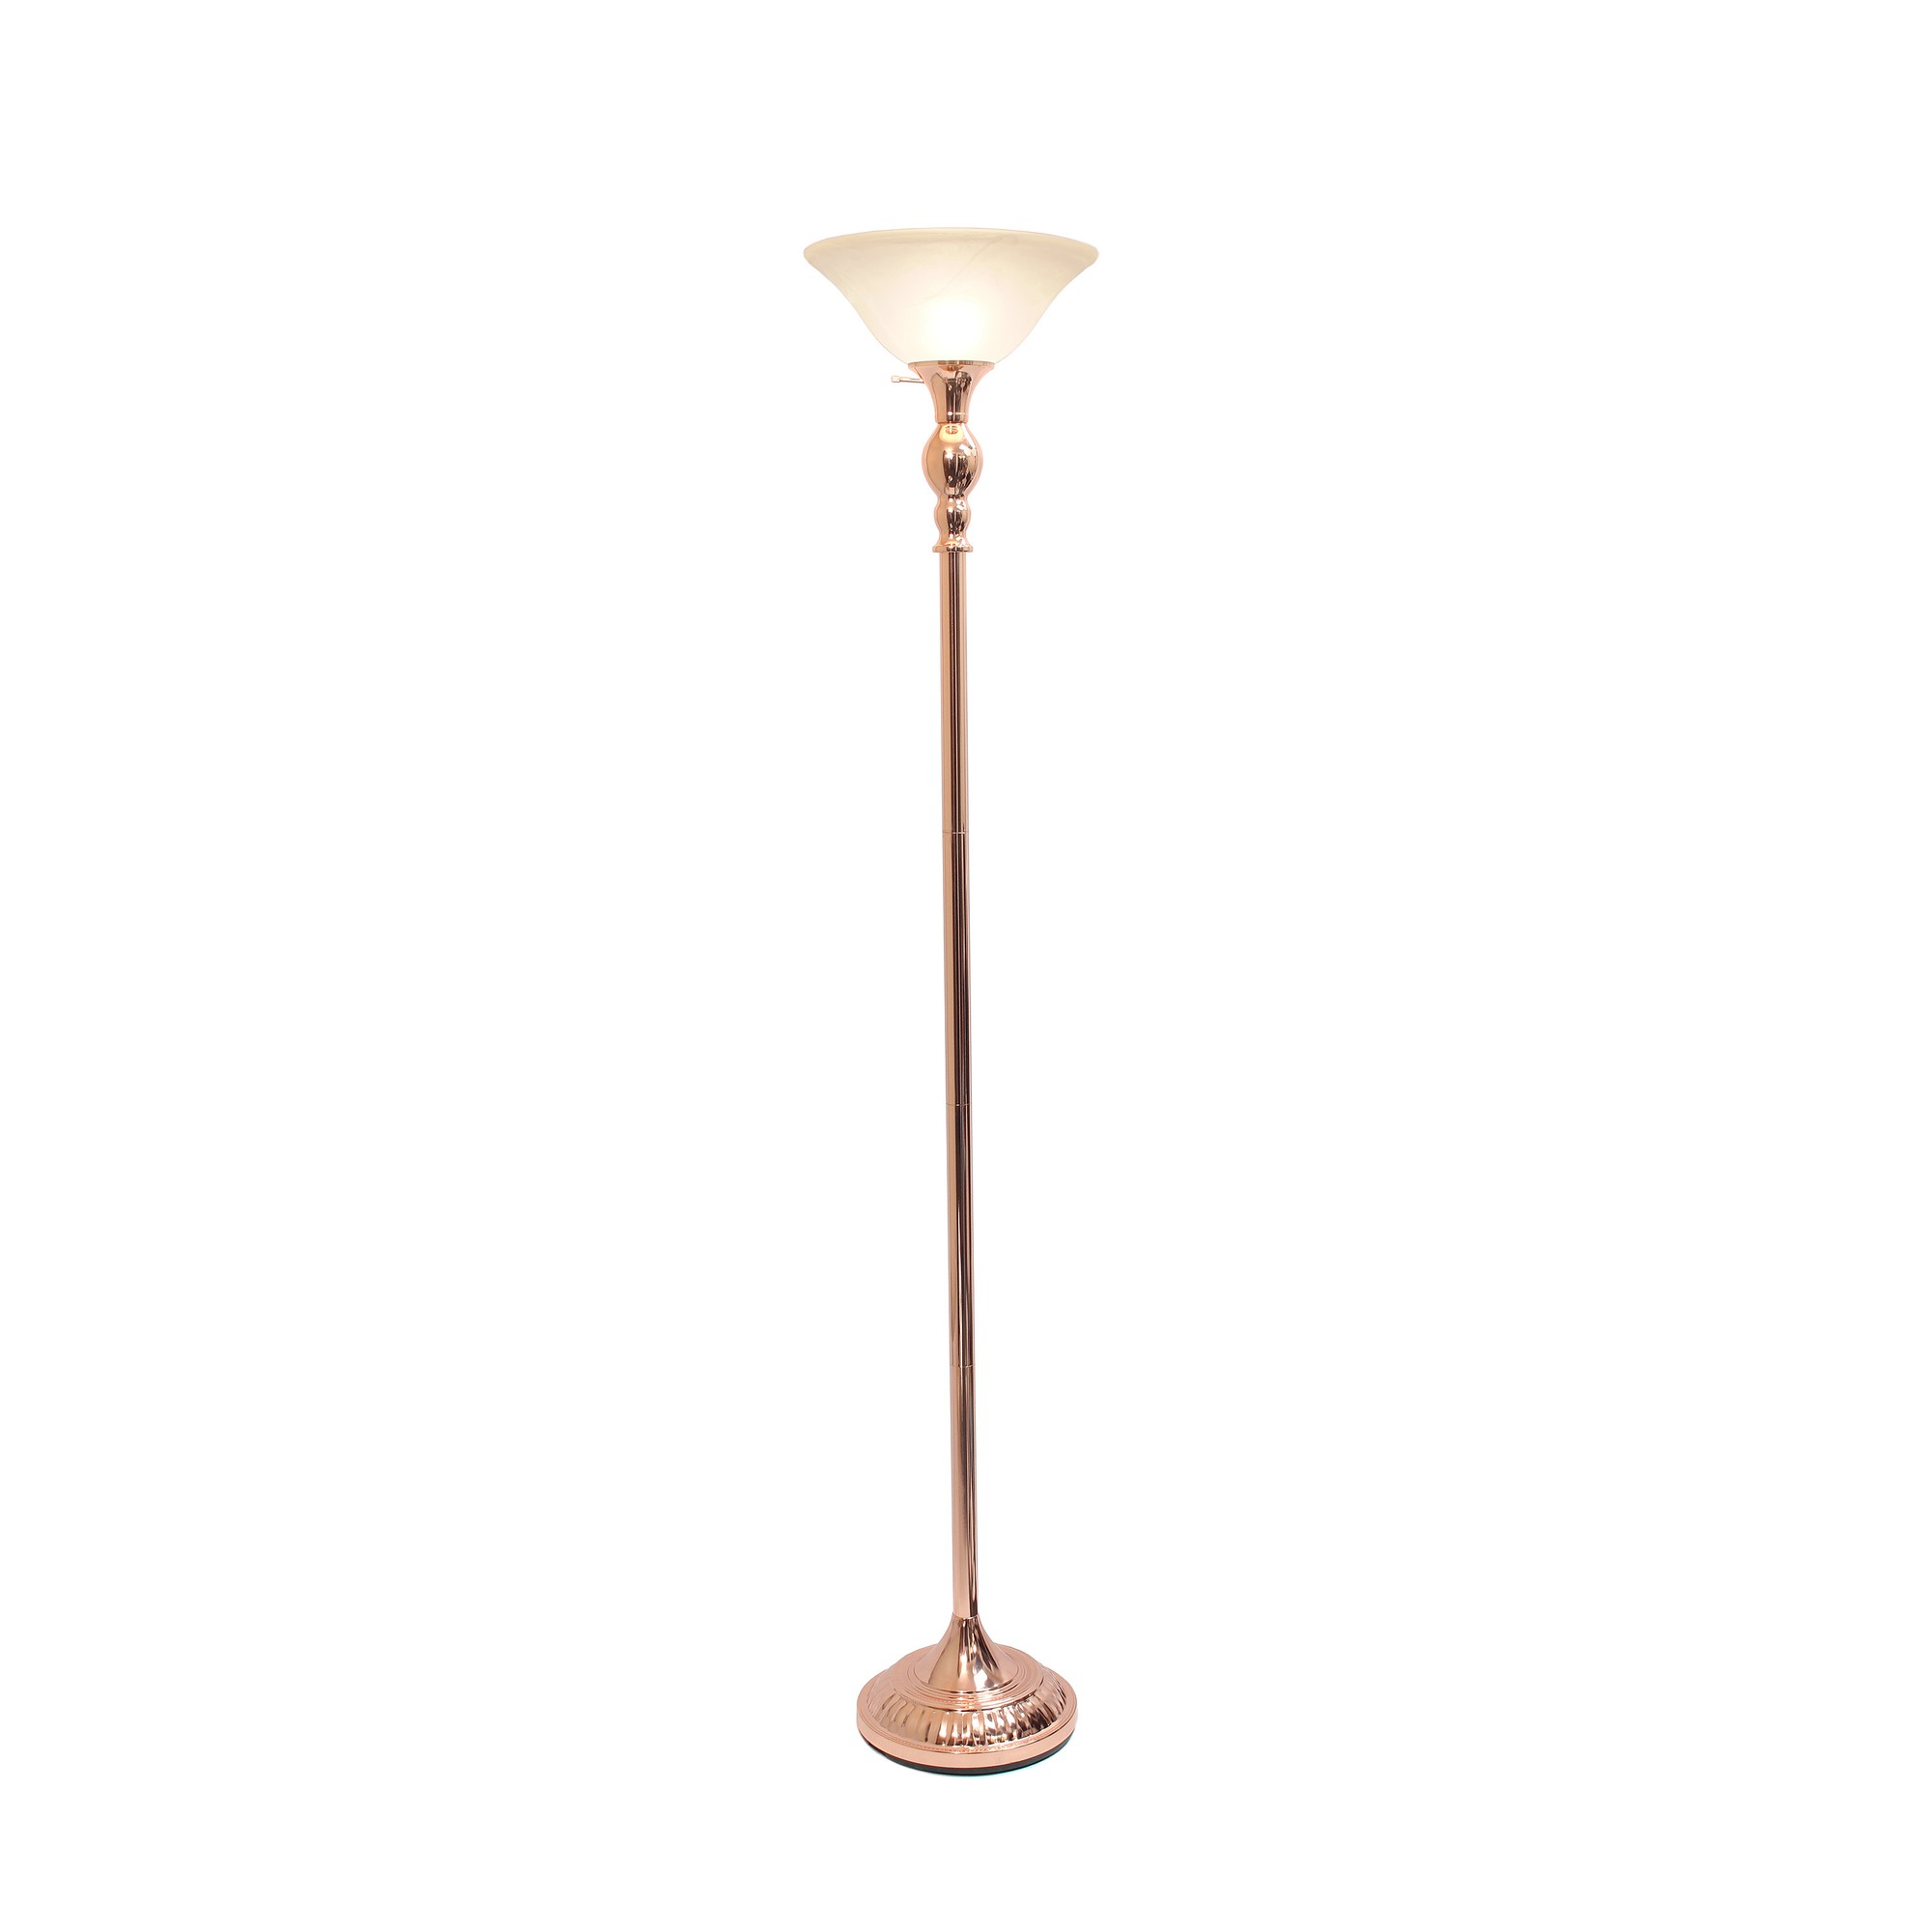 Lalia Home Classic 1 Light Torchiere Floor Lamp with Marbleized Glass Shade, Rose Gold